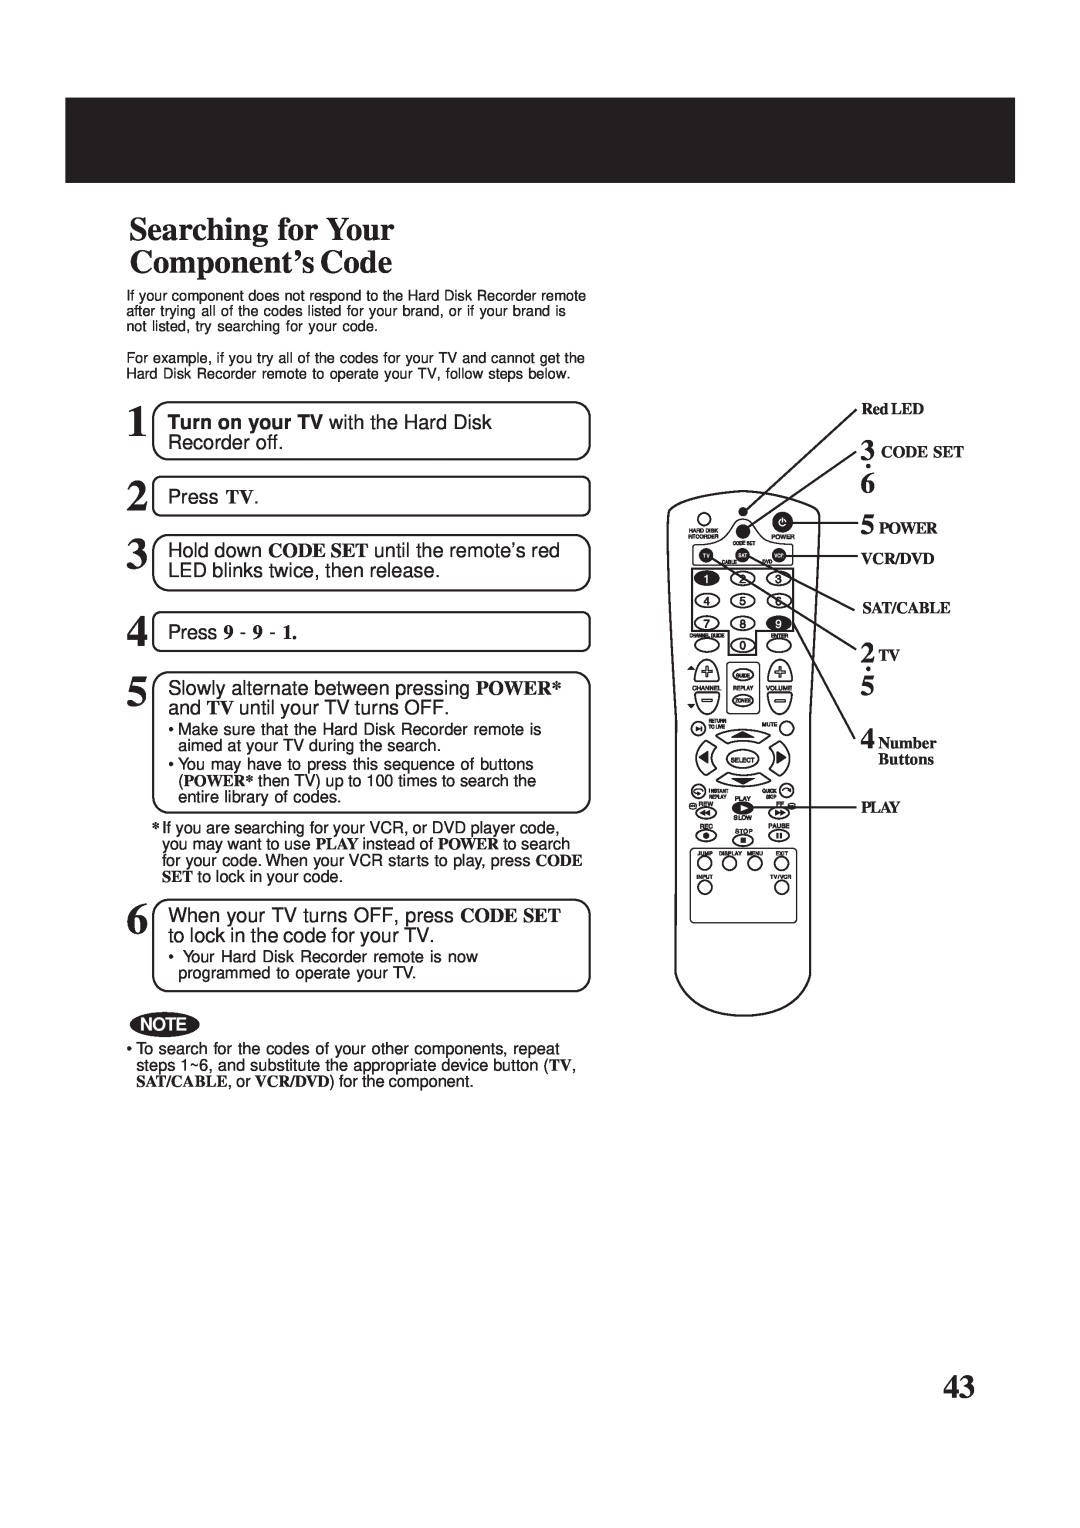 Panasonic PV-HS2000 operating instructions Searching for Your Component’s Code, 2 TV 